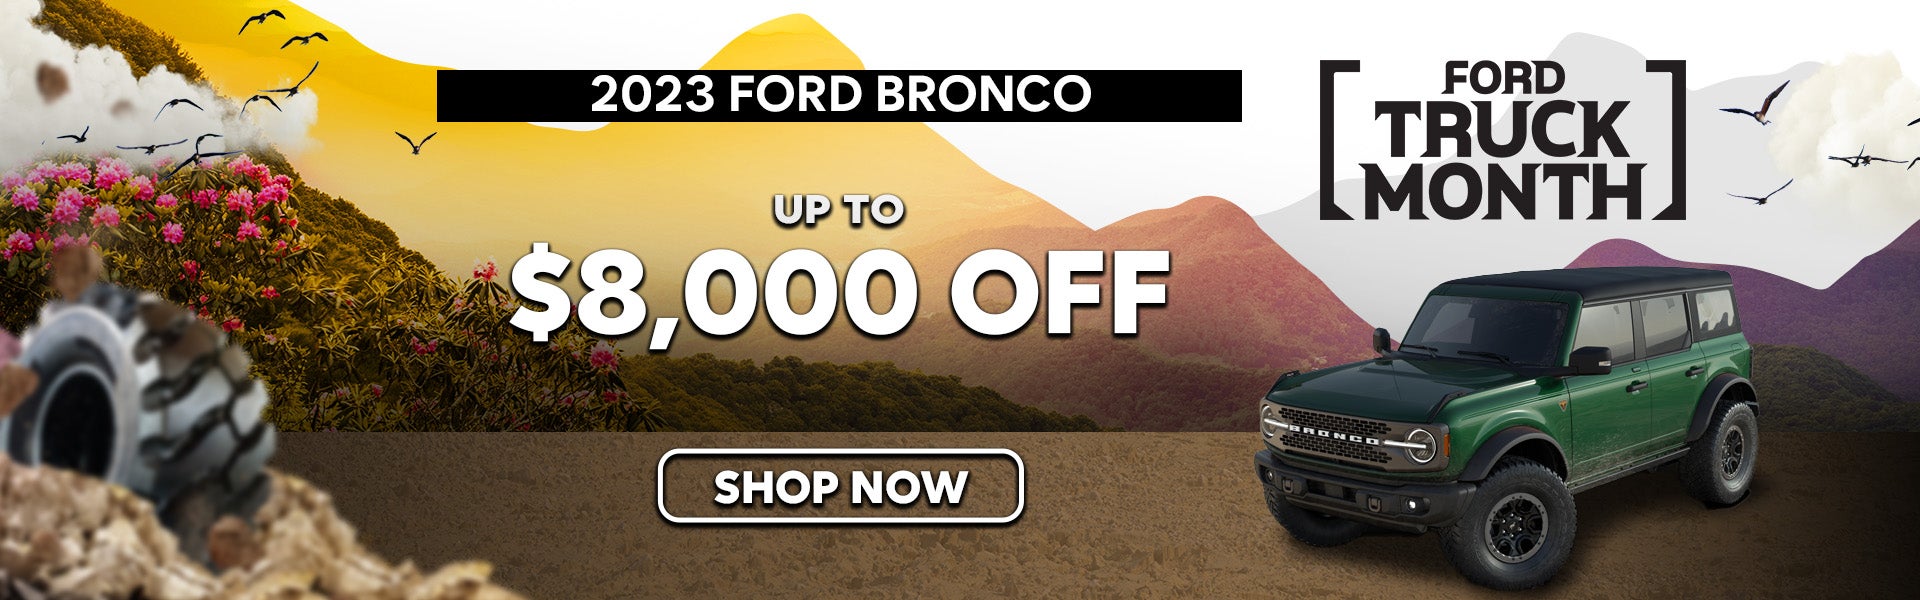 2023 Ford Bronco Special Offer